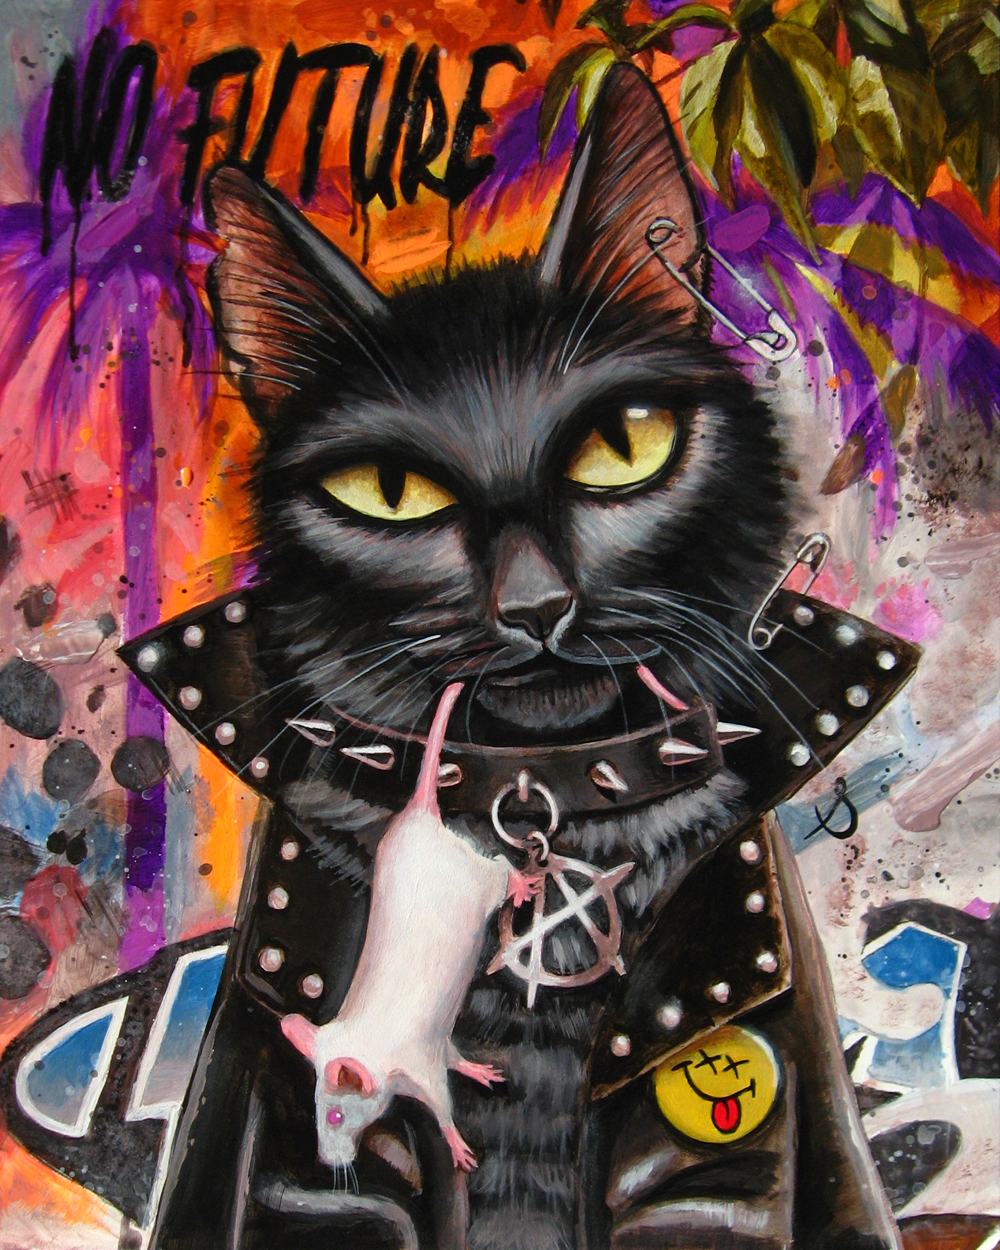 This feisty punk rock cat was painted using acrylics. He stands in front of a vibrant graffiti wall that says NO FUTURE. He holds a white mouse in his mouth. Around his neck, he wears a spiked collar with a silver anarchy pendant. He also wears a black leather jacket with a dead happy face pin on it. His ear has been pierced and has a safety pin instead of an earring. He gazes at the viewer with defiant yellow eyes. The painting has been signed with a cursive S, which is the signature of creature artist Sara Wagner.